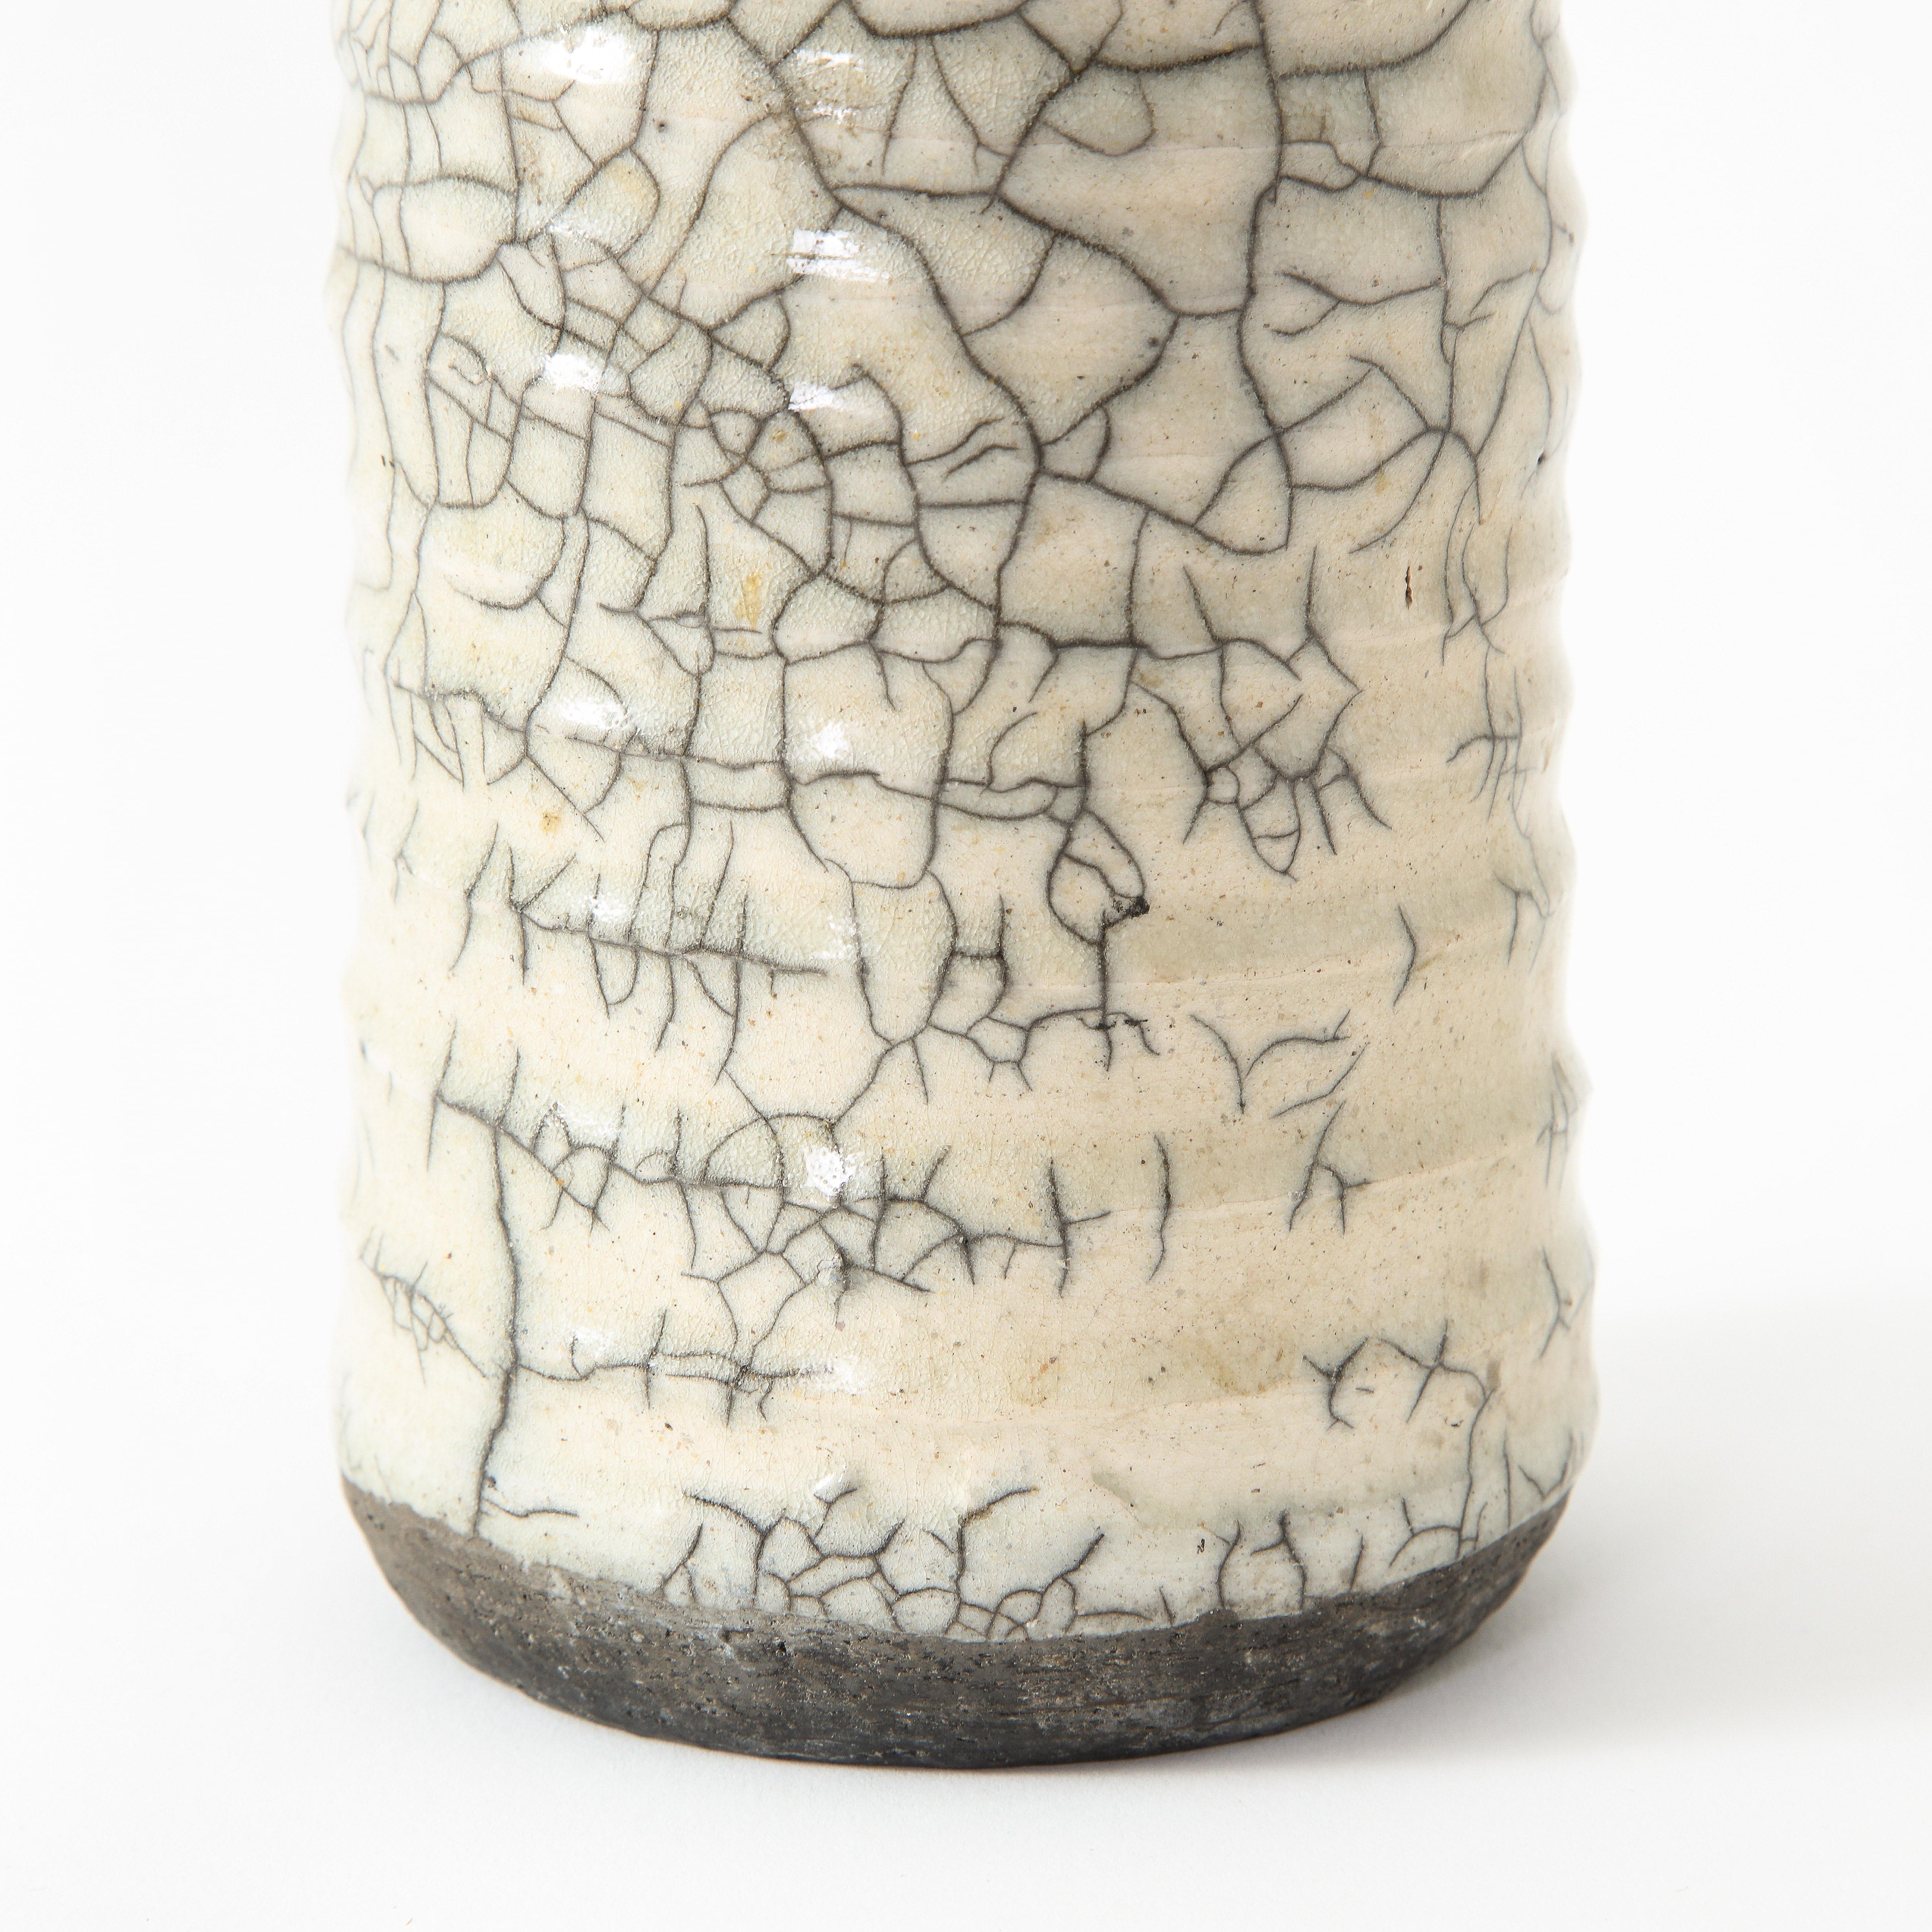 Off-White Ceramic Vase with Intricate Crackling 3